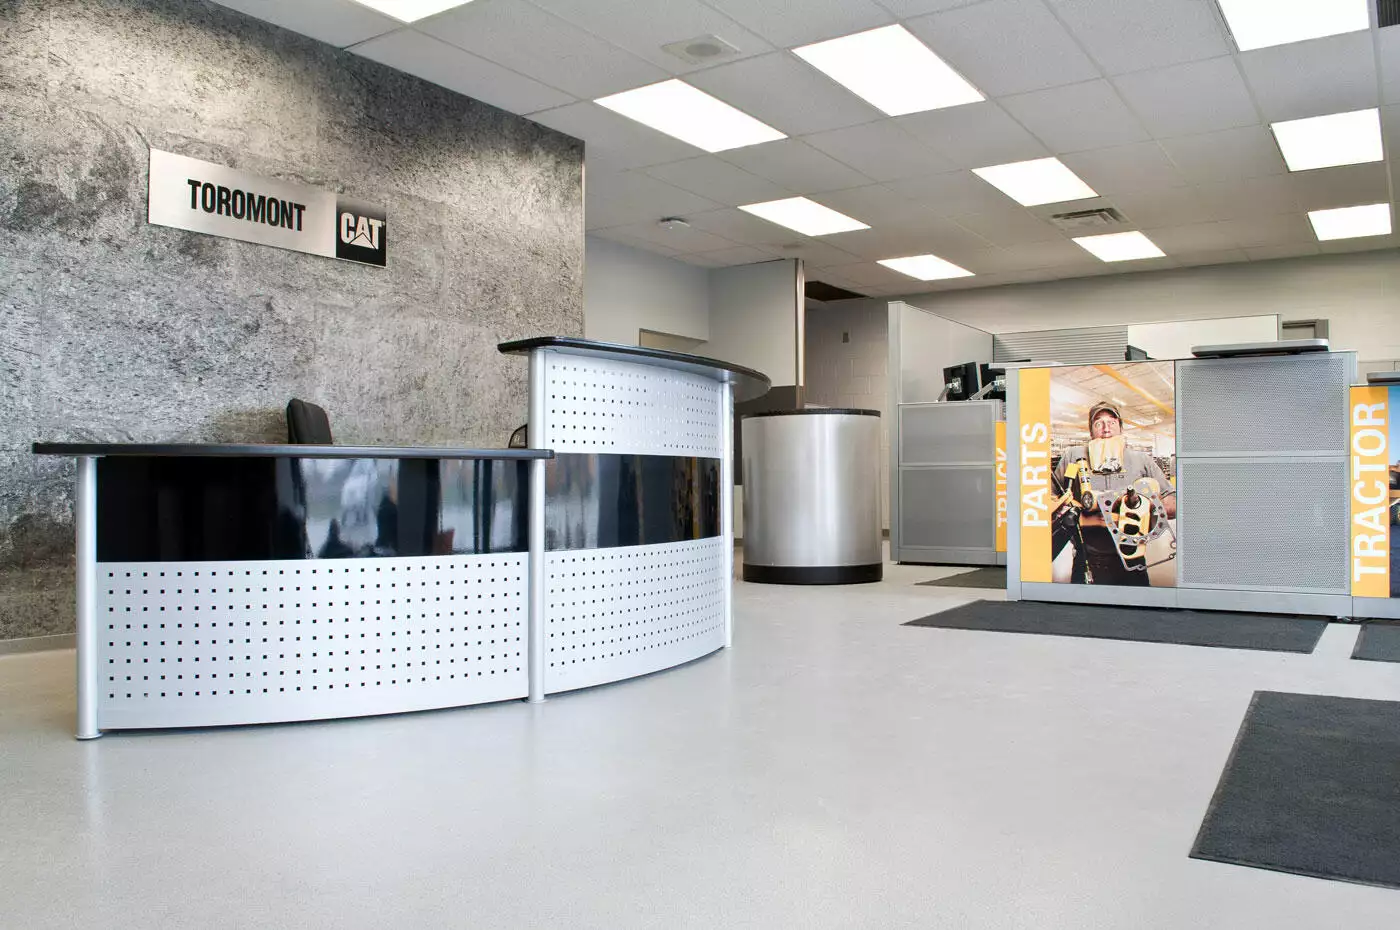 Modern office lobby with two curved reception desks, featuring branded banners for toromont cat, and a clean, professional design.